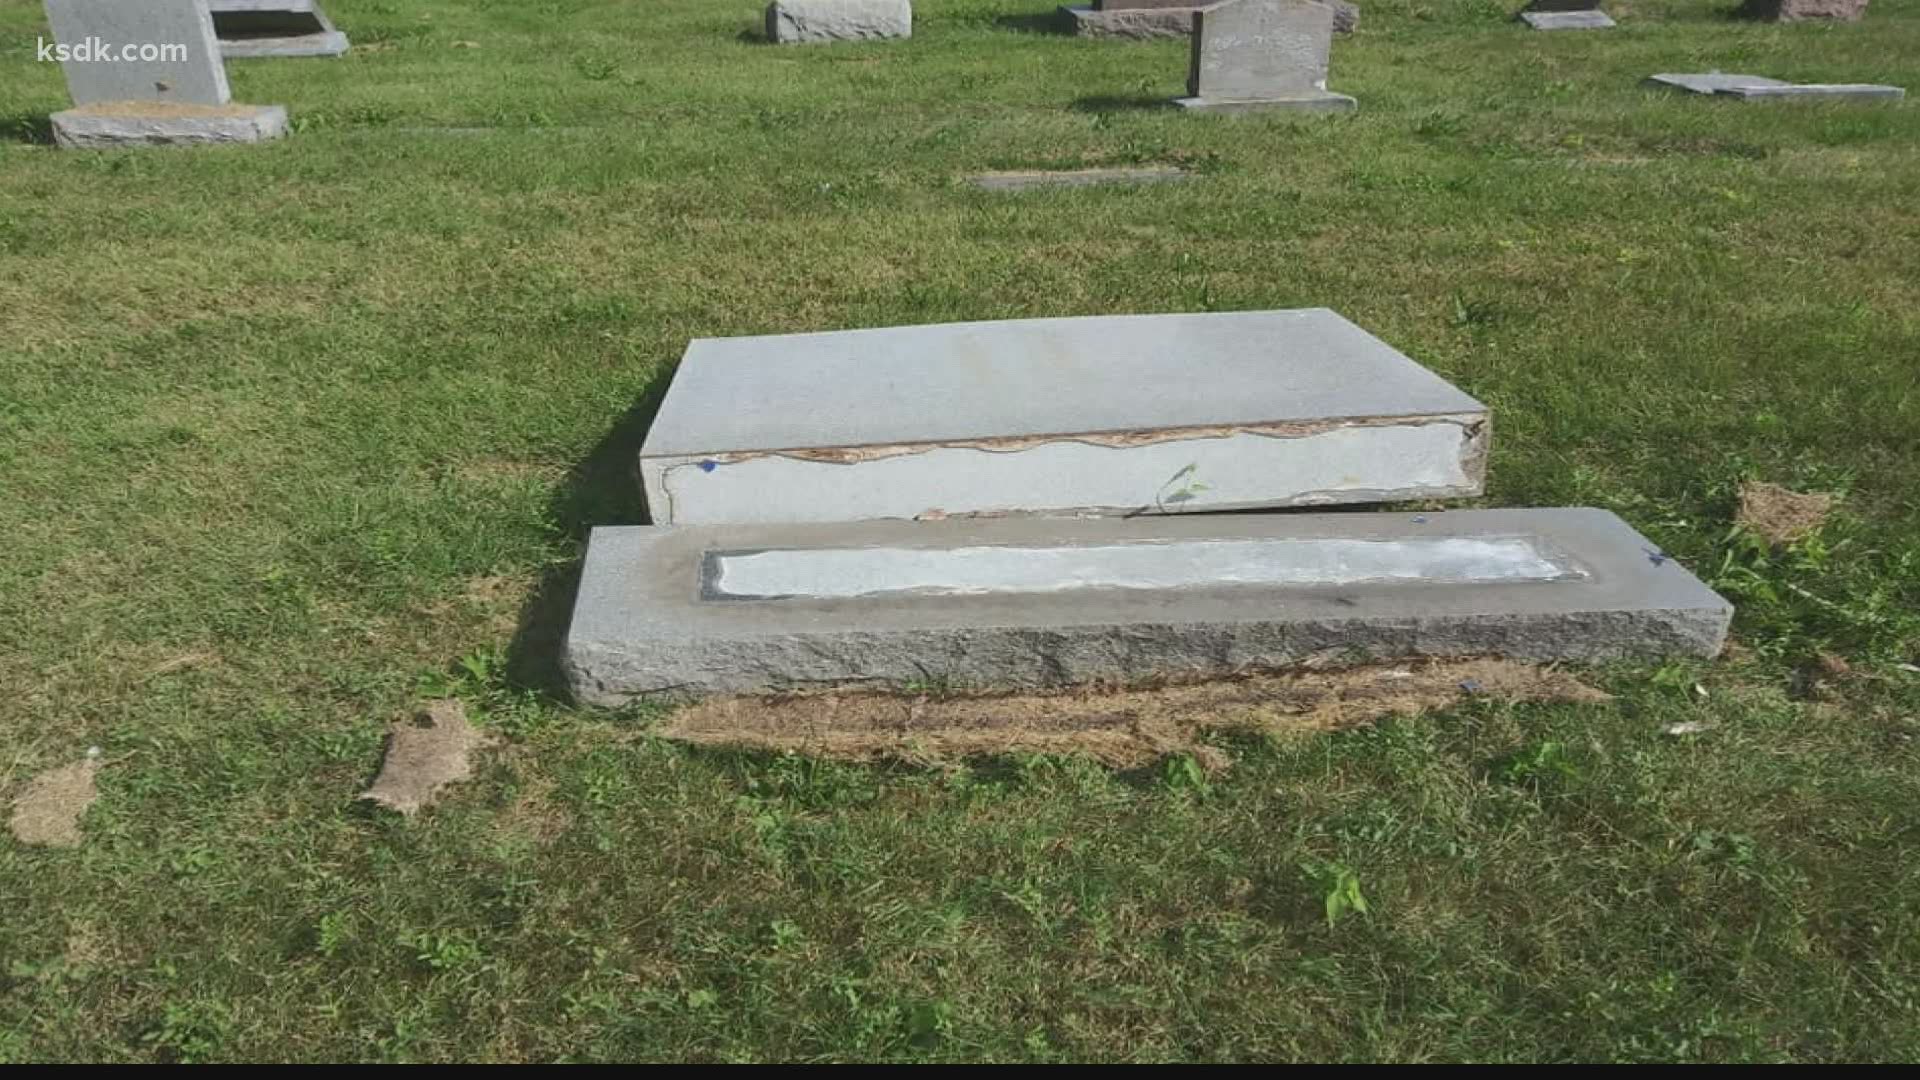 About 200 headstones were knocked to the ground